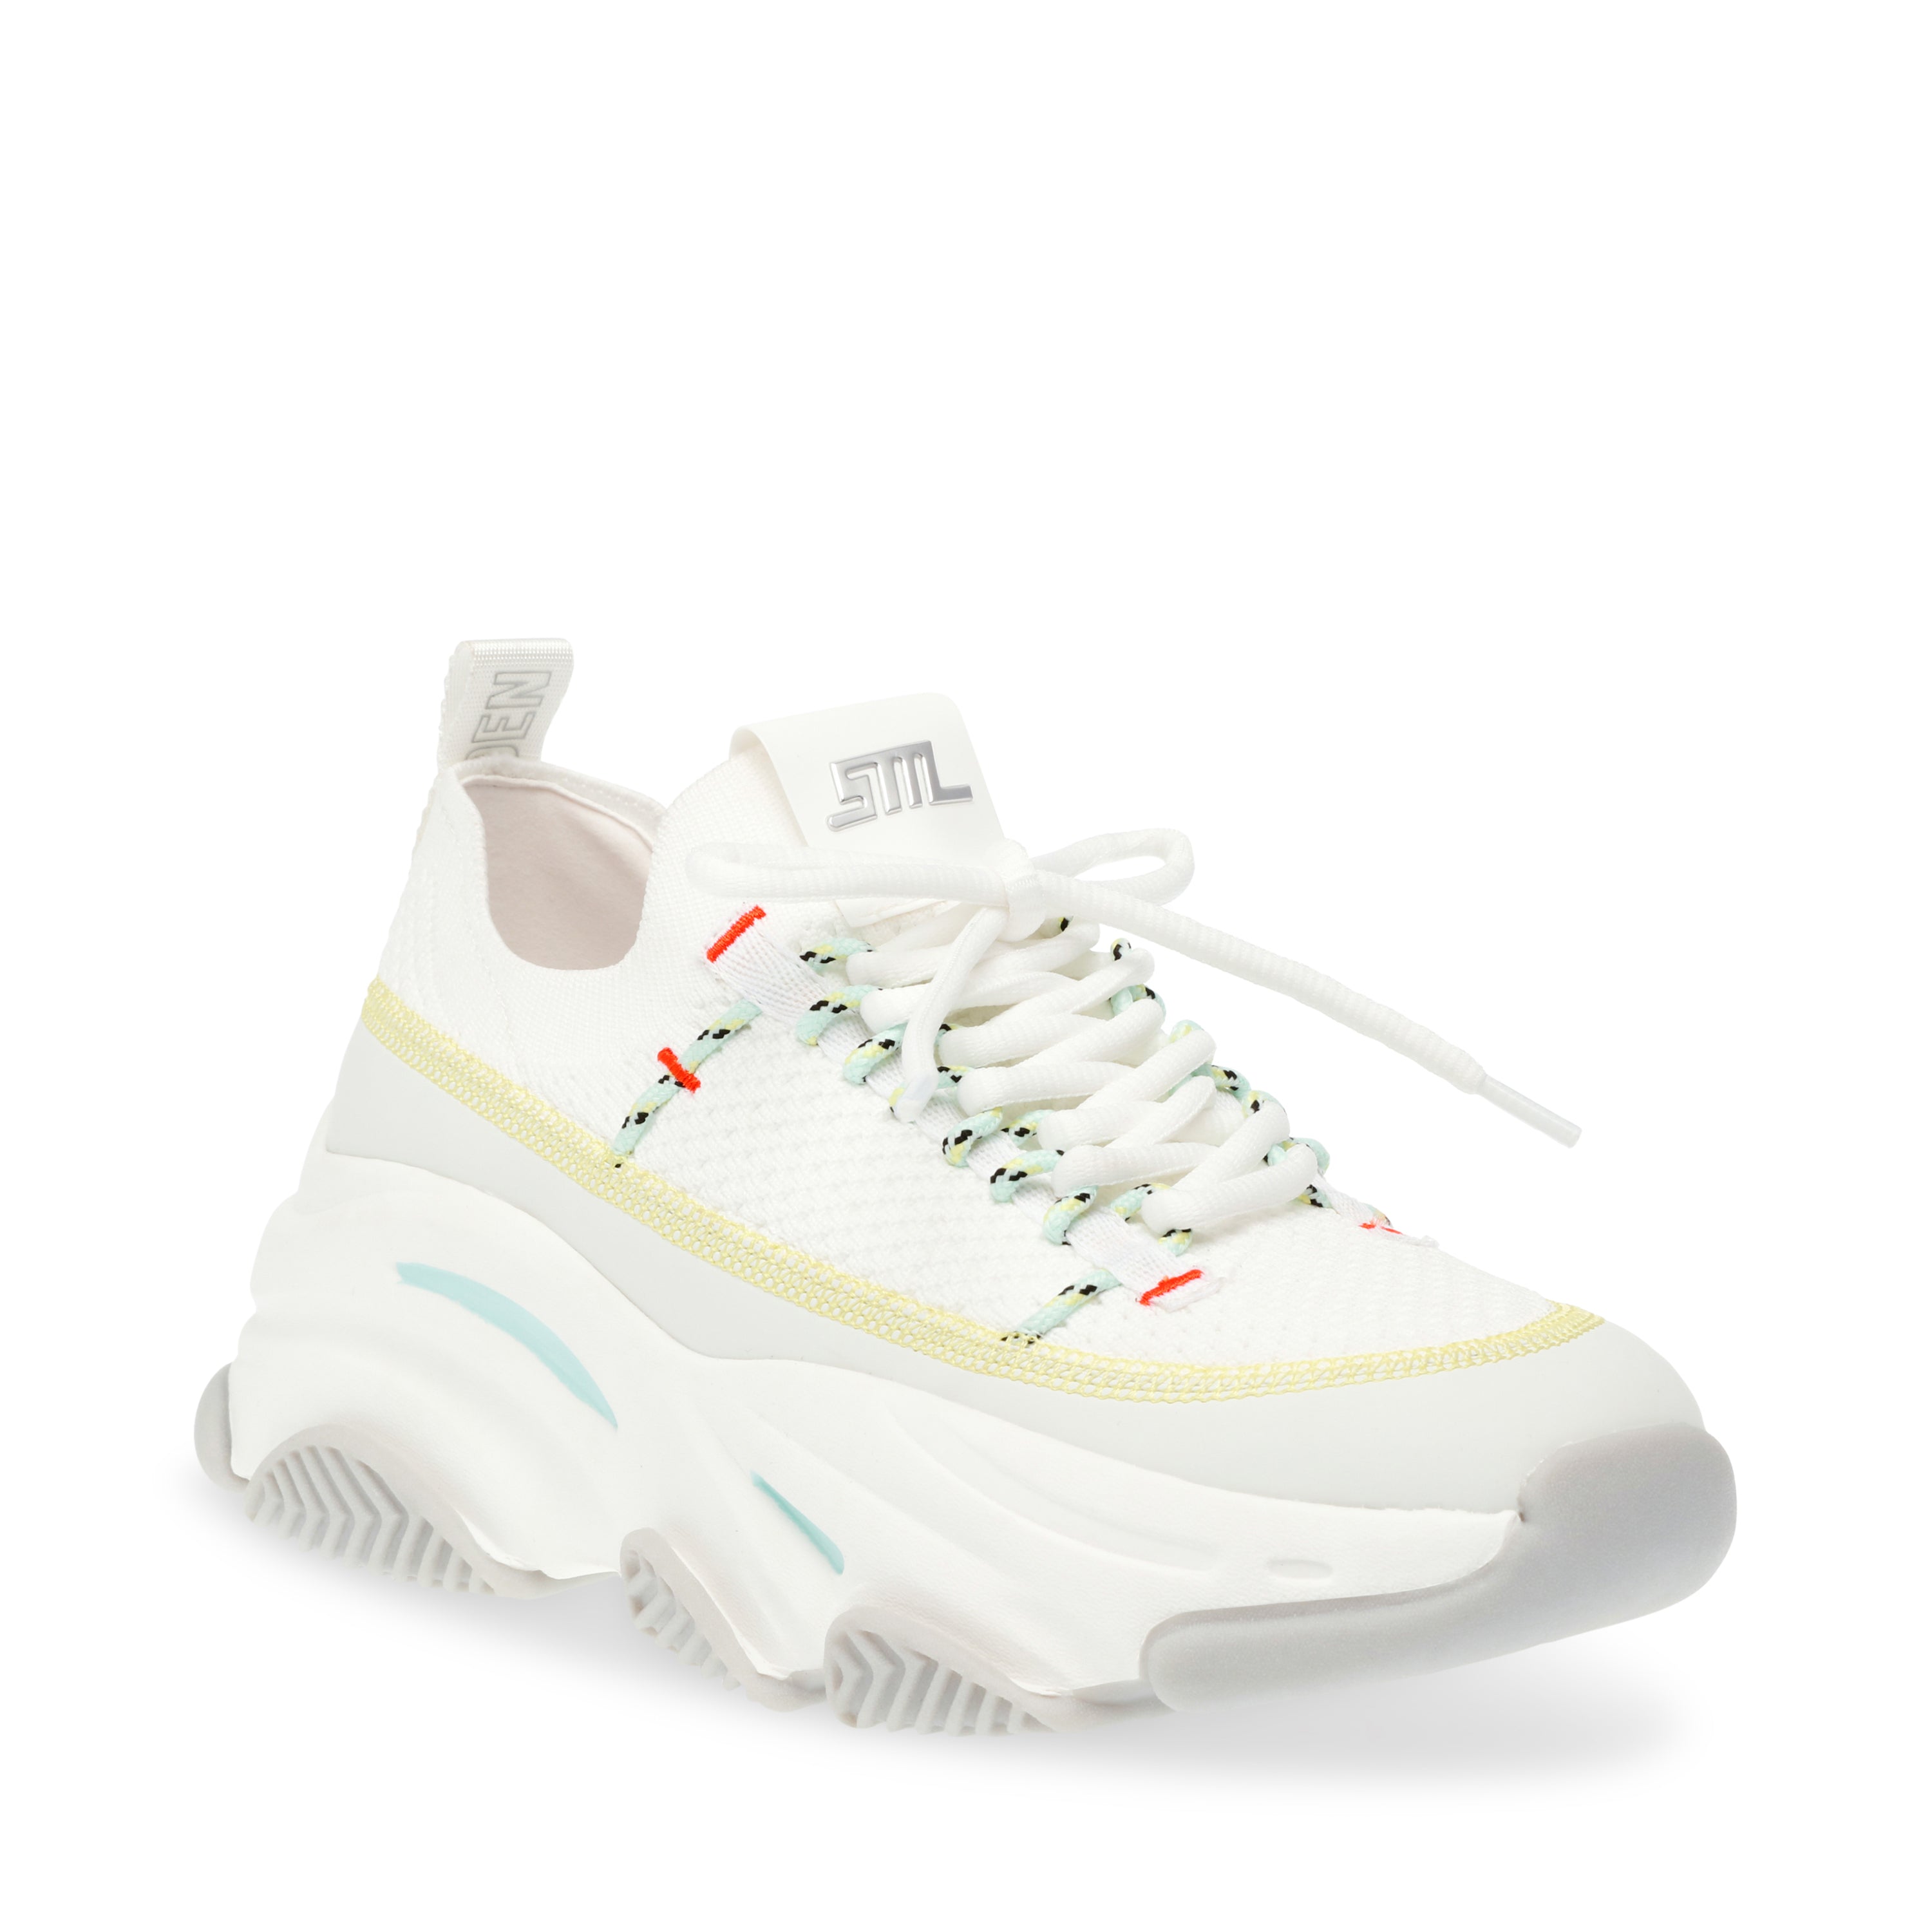 PLAYMAKER WHITE/YELLOW SNEAKERS- Hover Image